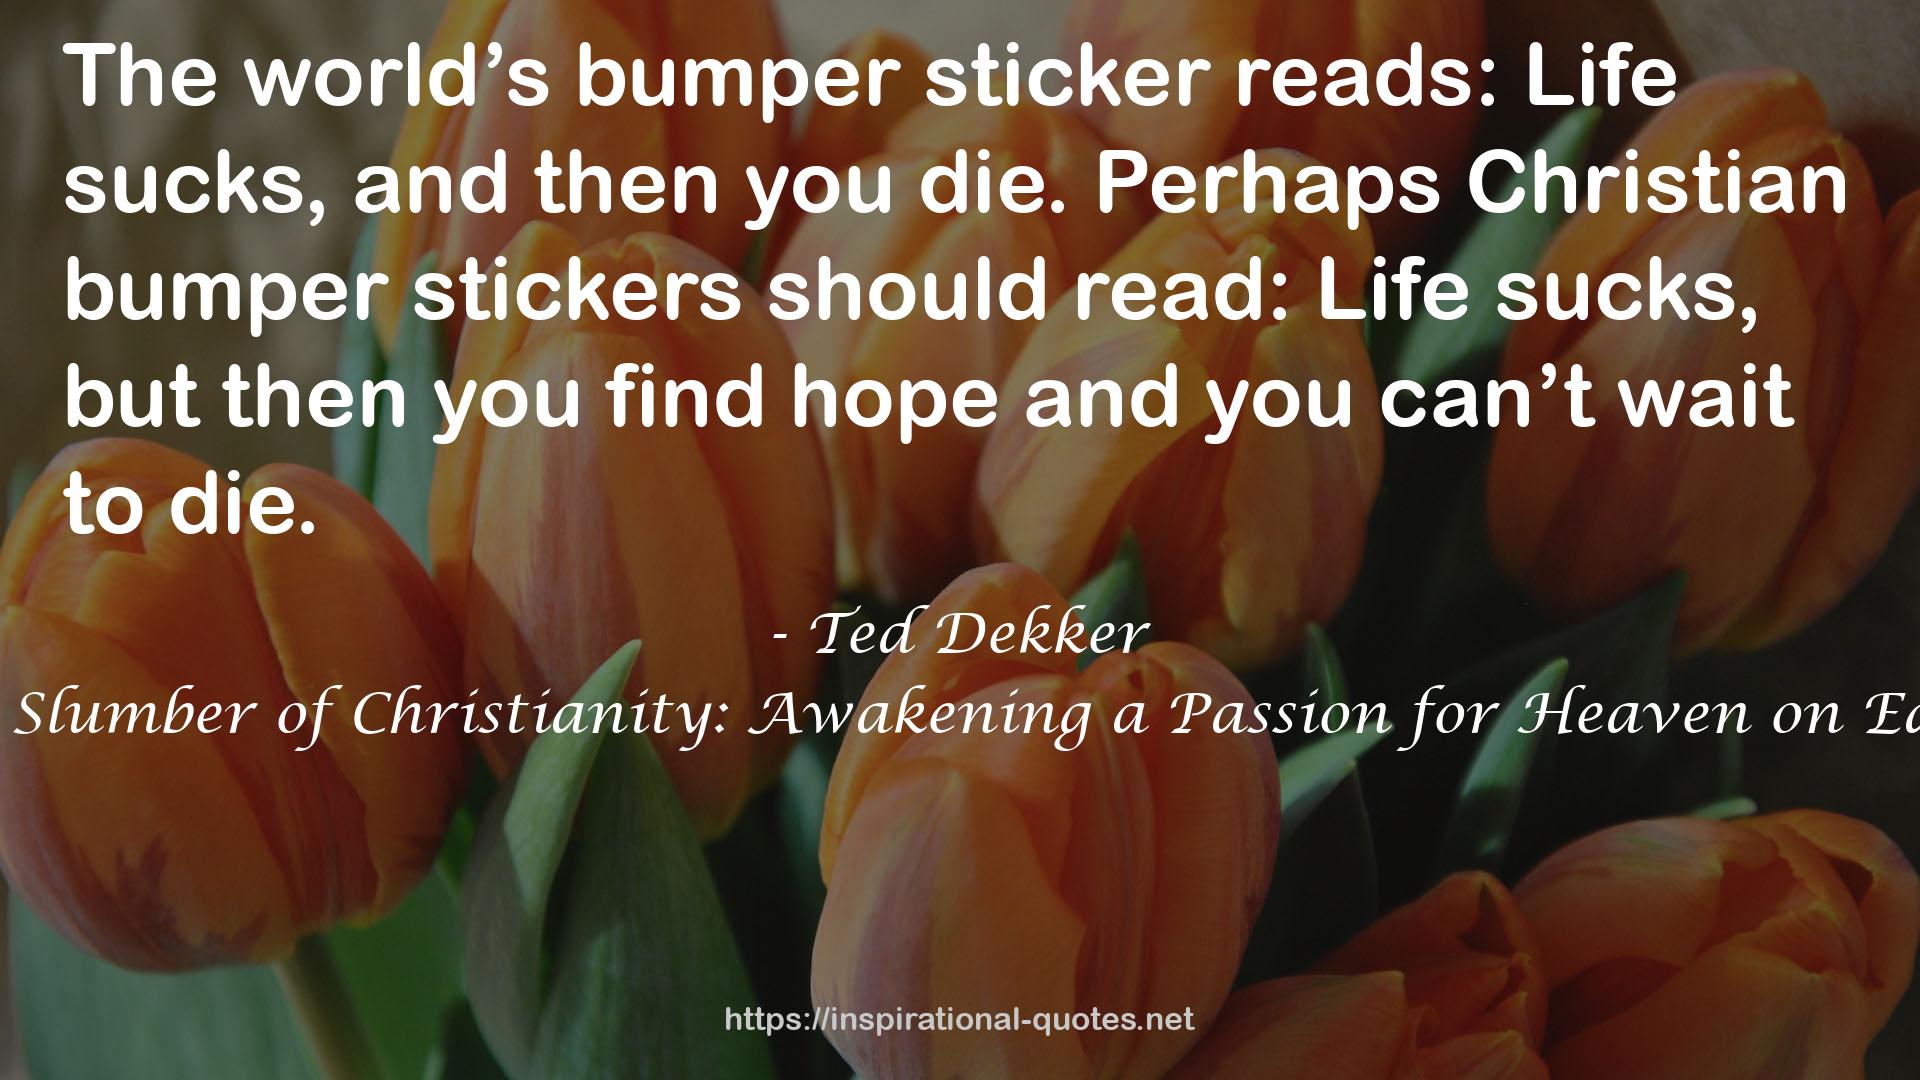 The Slumber of Christianity: Awakening a Passion for Heaven on Earth QUOTES